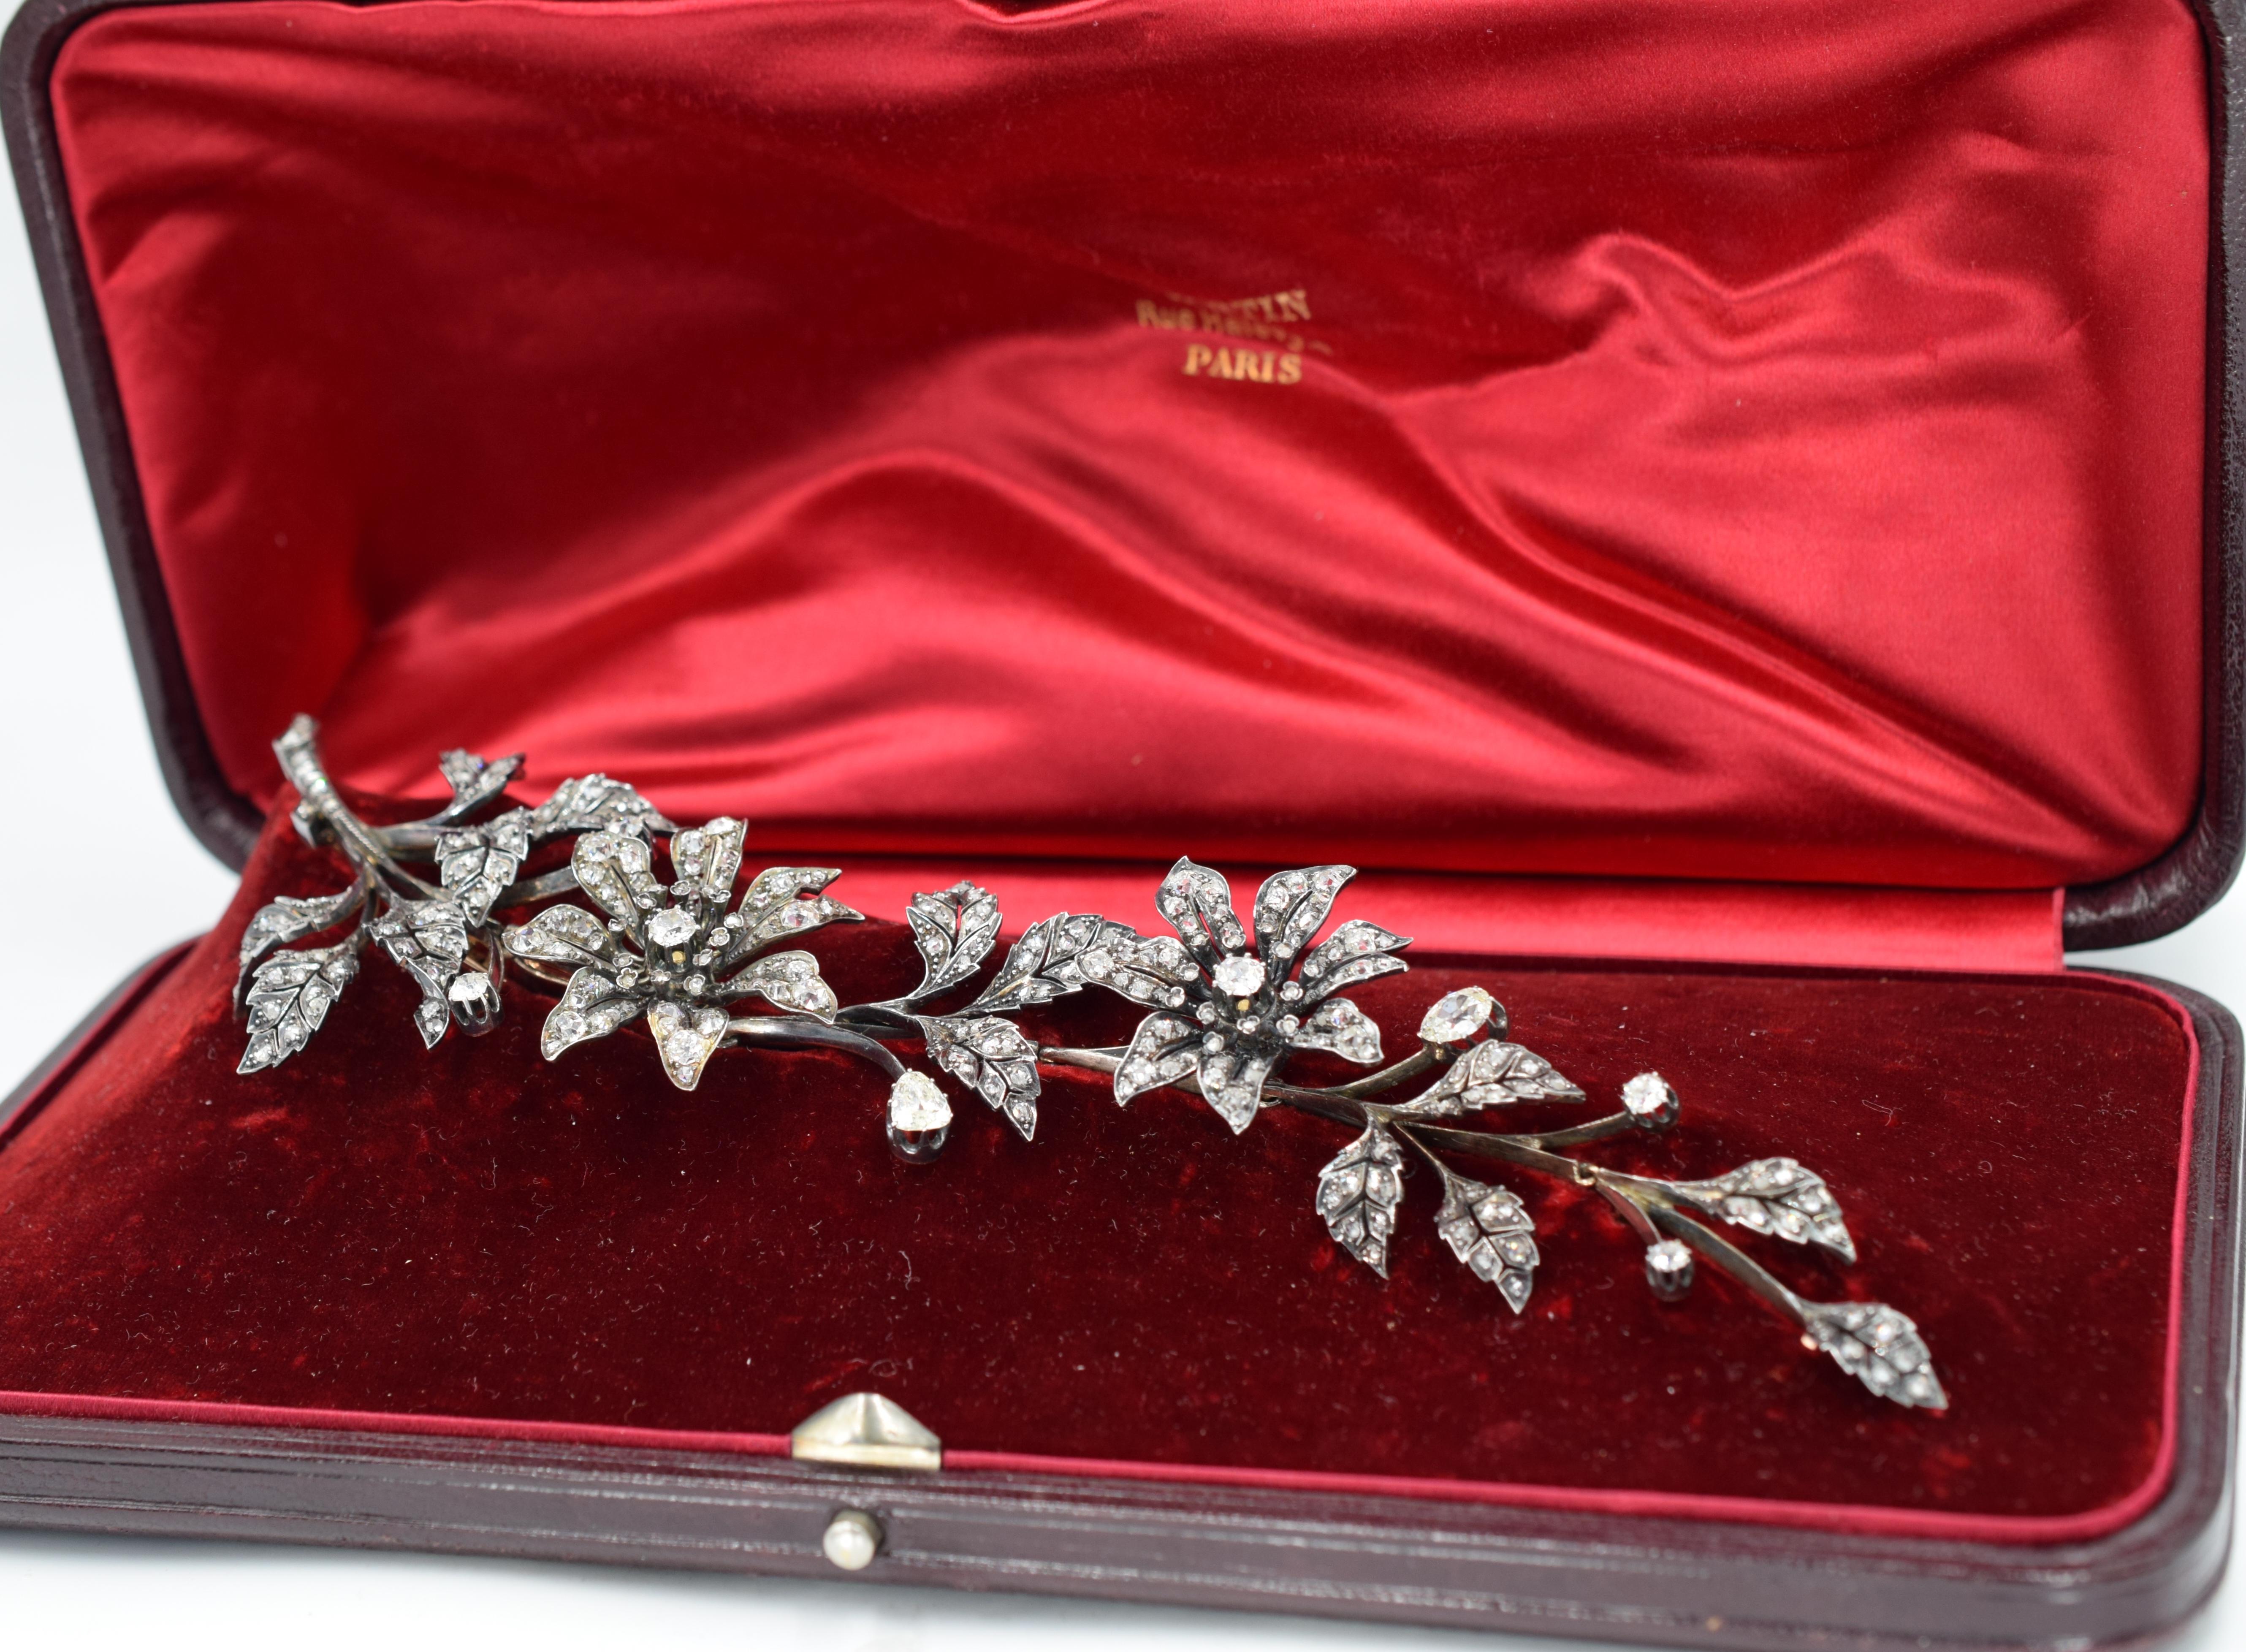 Antique floral diamond brooch made in gold and silver. Circa 1860.
The brooch consists of fourteen leaves and two flowers placed on a stem that is detatchable into five separate parts, the first and last part equipped with a pin. It is set with